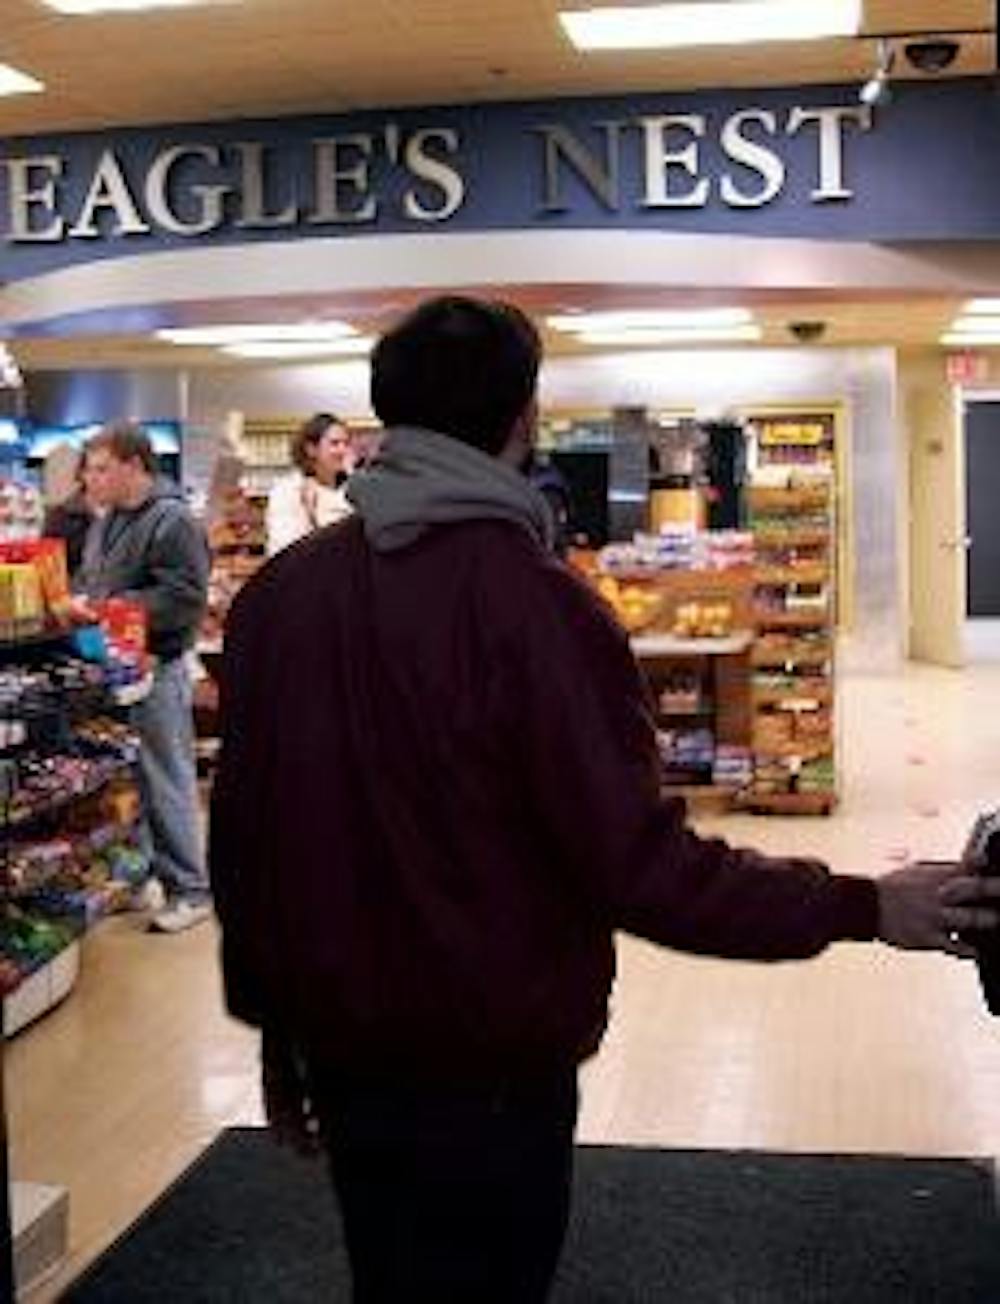 PRICE PROTEST - Concerns about high prices at The Eagle's Nest prompted the Student Government to work on a plan to start a free shuttle van service to the Tenleytown CVS and Whole Foods stores. Student volunteers will drive the route in AUTO vans.